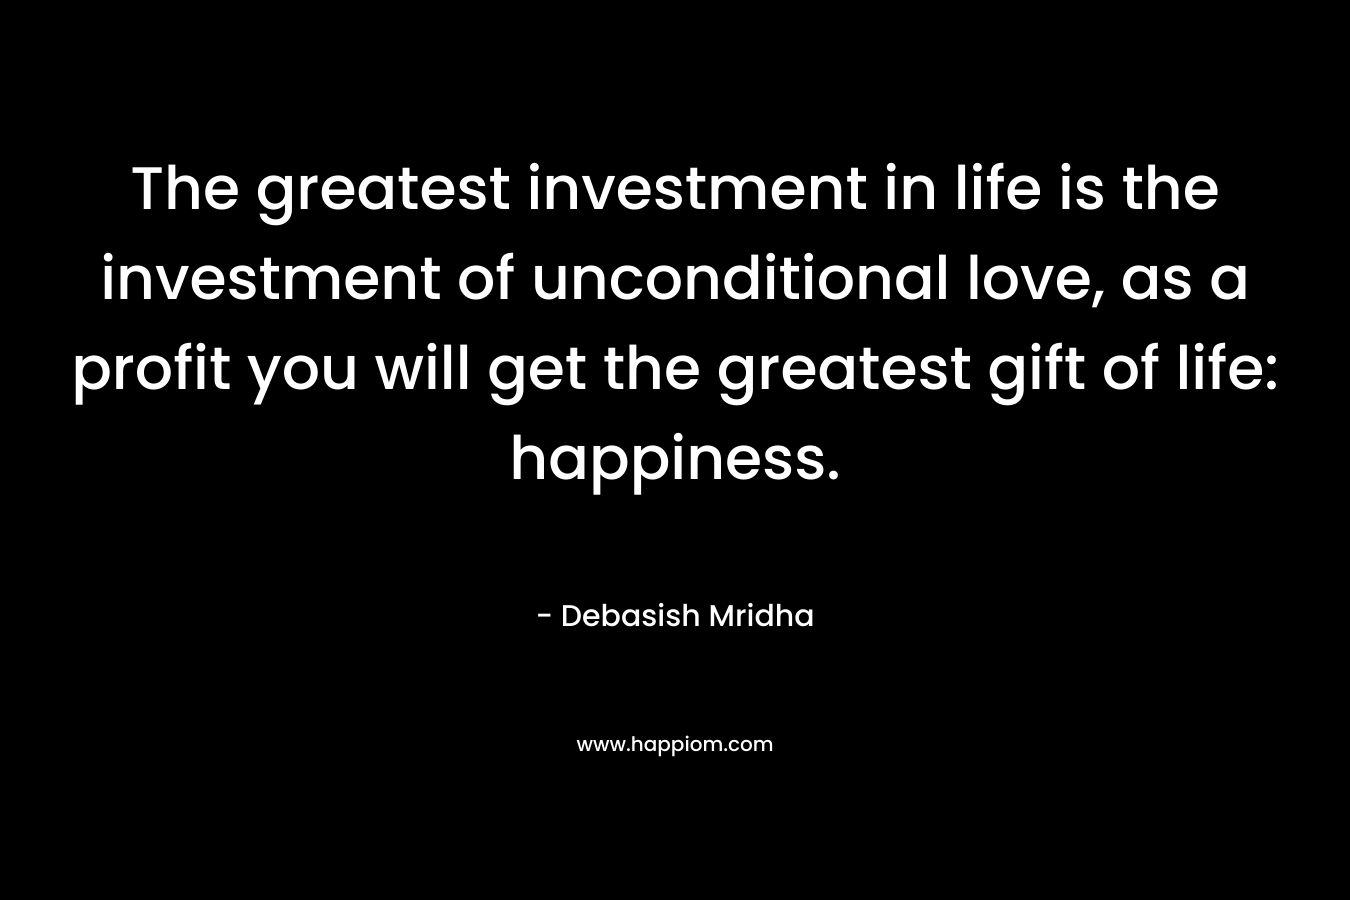 The greatest investment in life is the investment of unconditional love, as a profit you will get the greatest gift of life: happiness. – Debasish Mridha